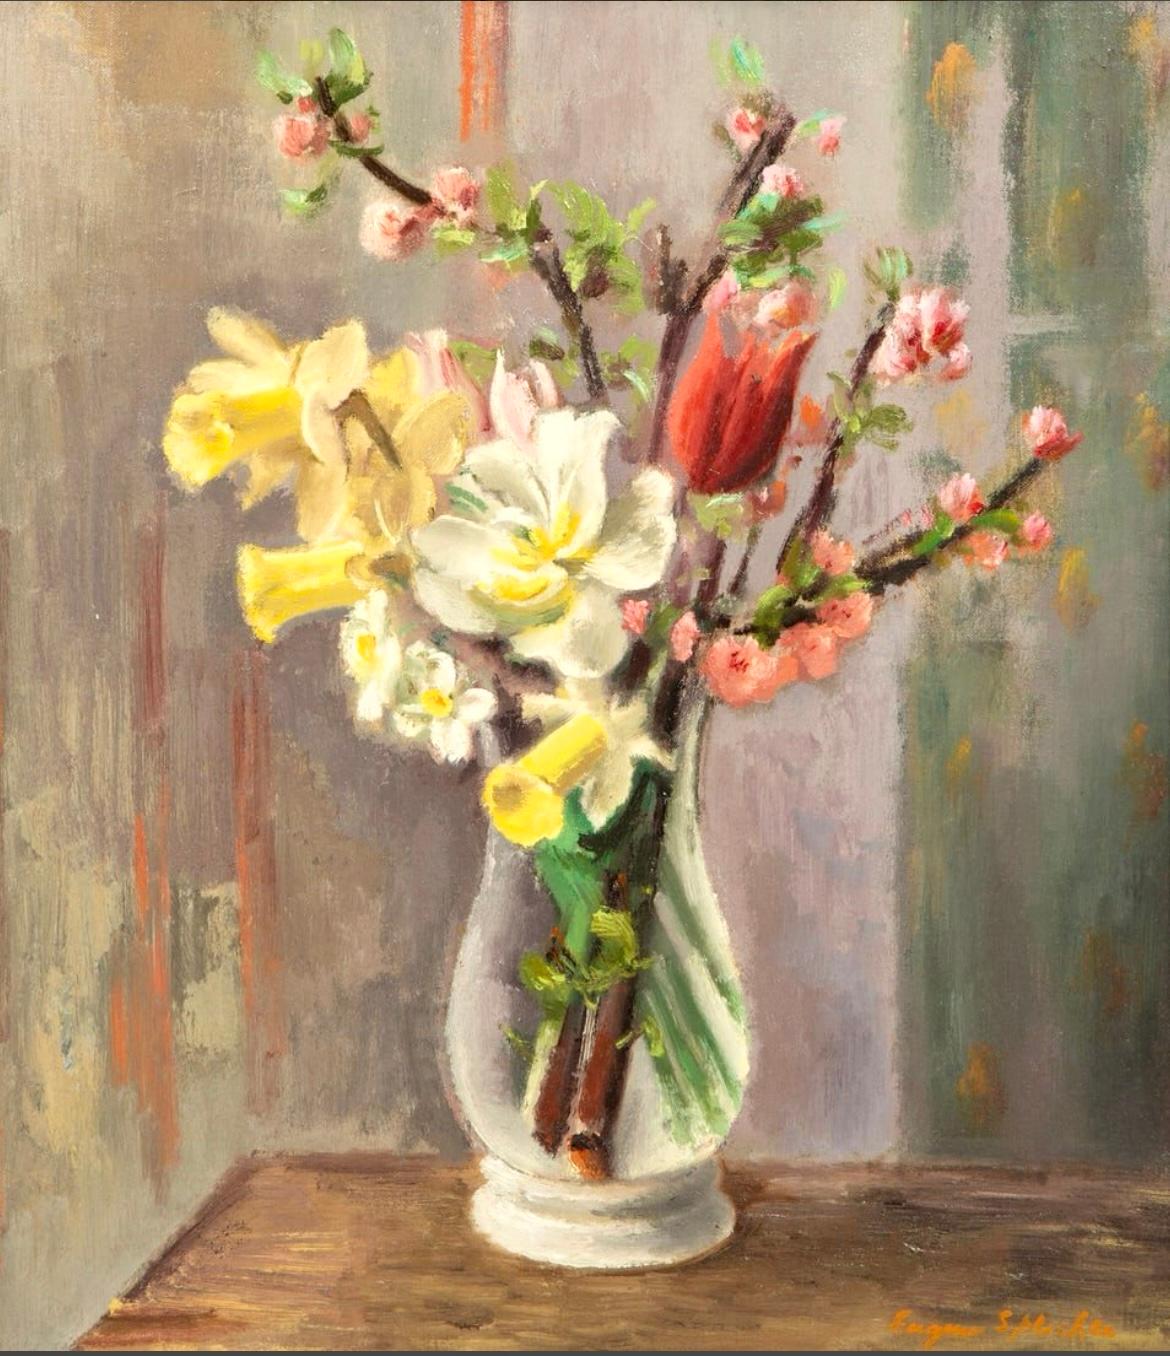 Fresh Cut Flowers in a Vase - Painting by Eugene Speicher